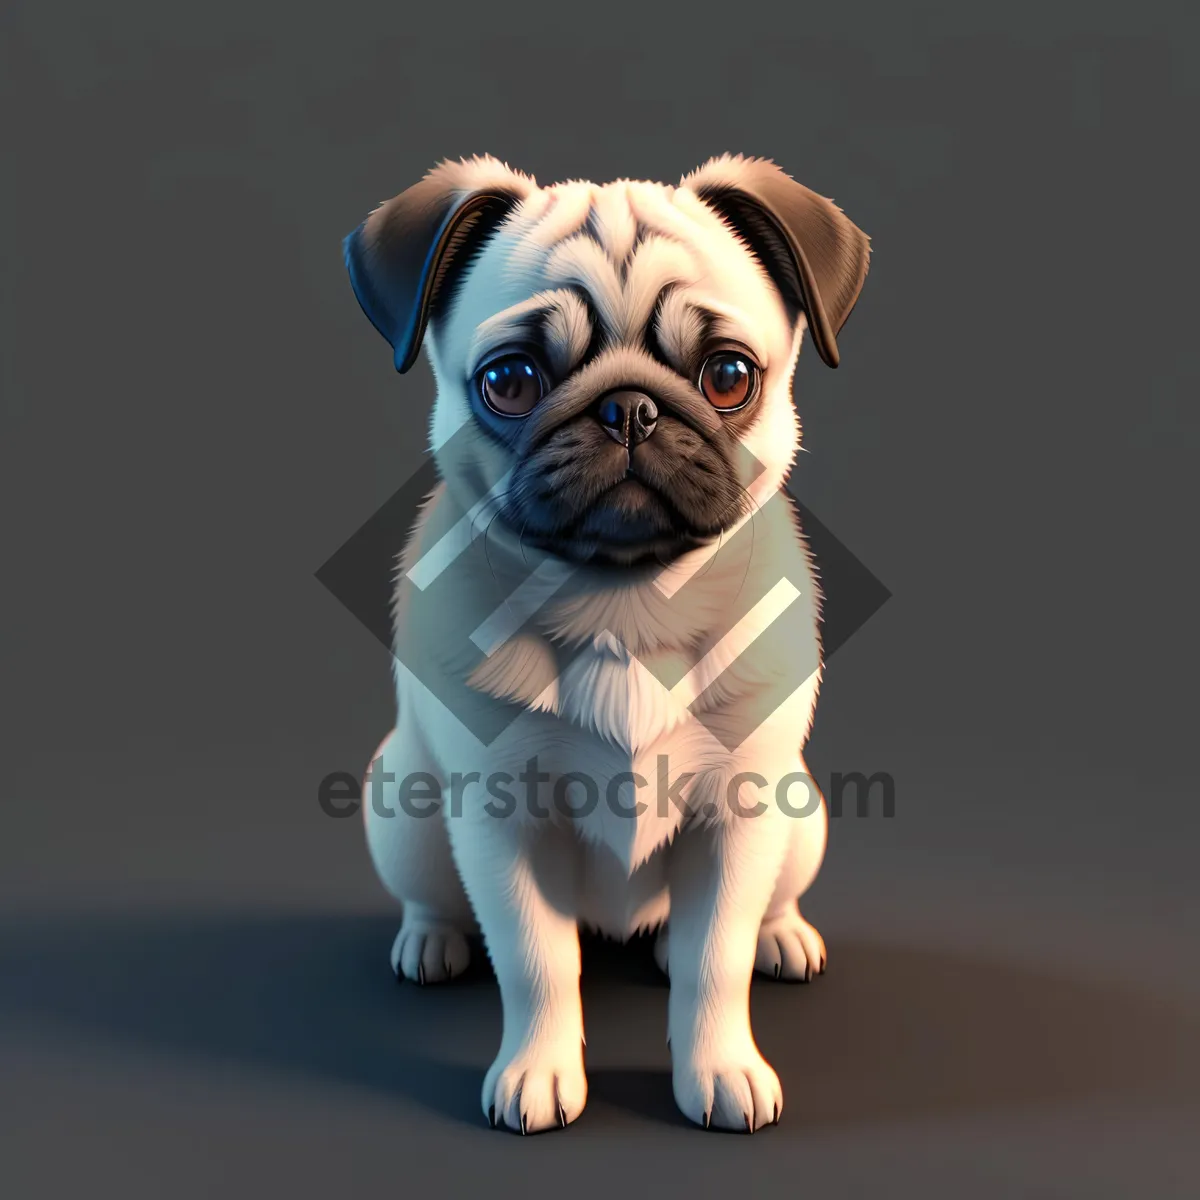 Picture of Adorable wrinkled bulldog puppy in studio portrait